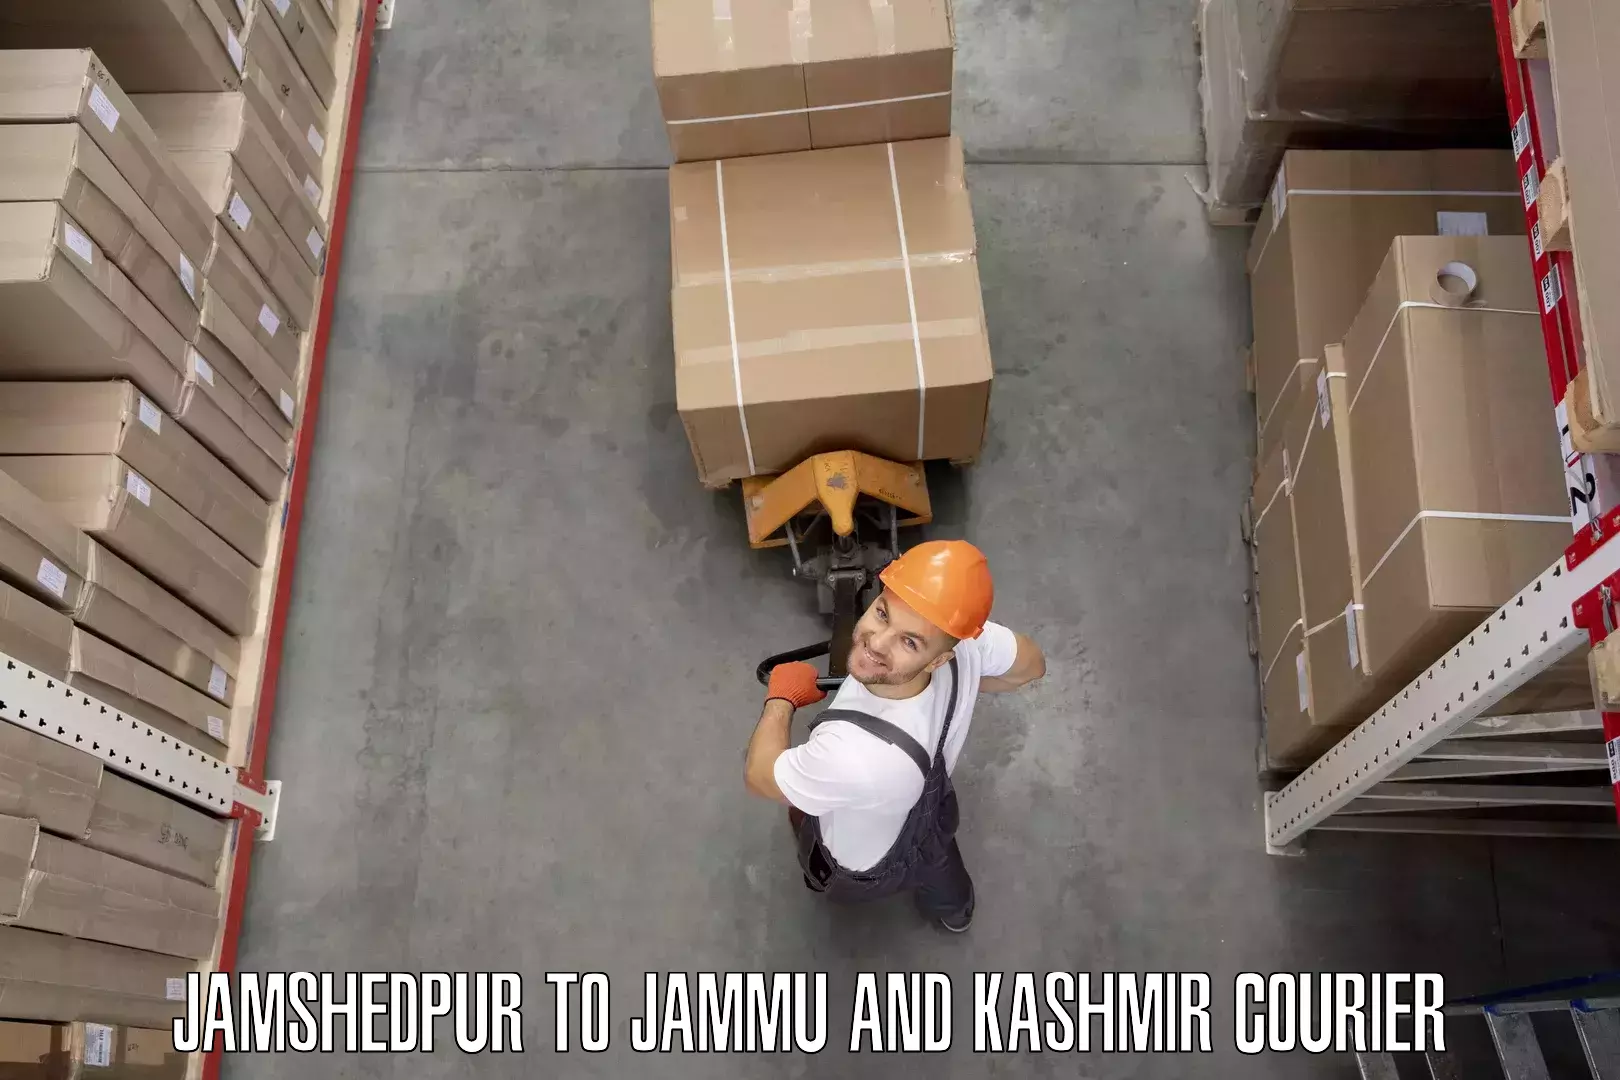 Moving and storage services Jamshedpur to Jammu and Kashmir